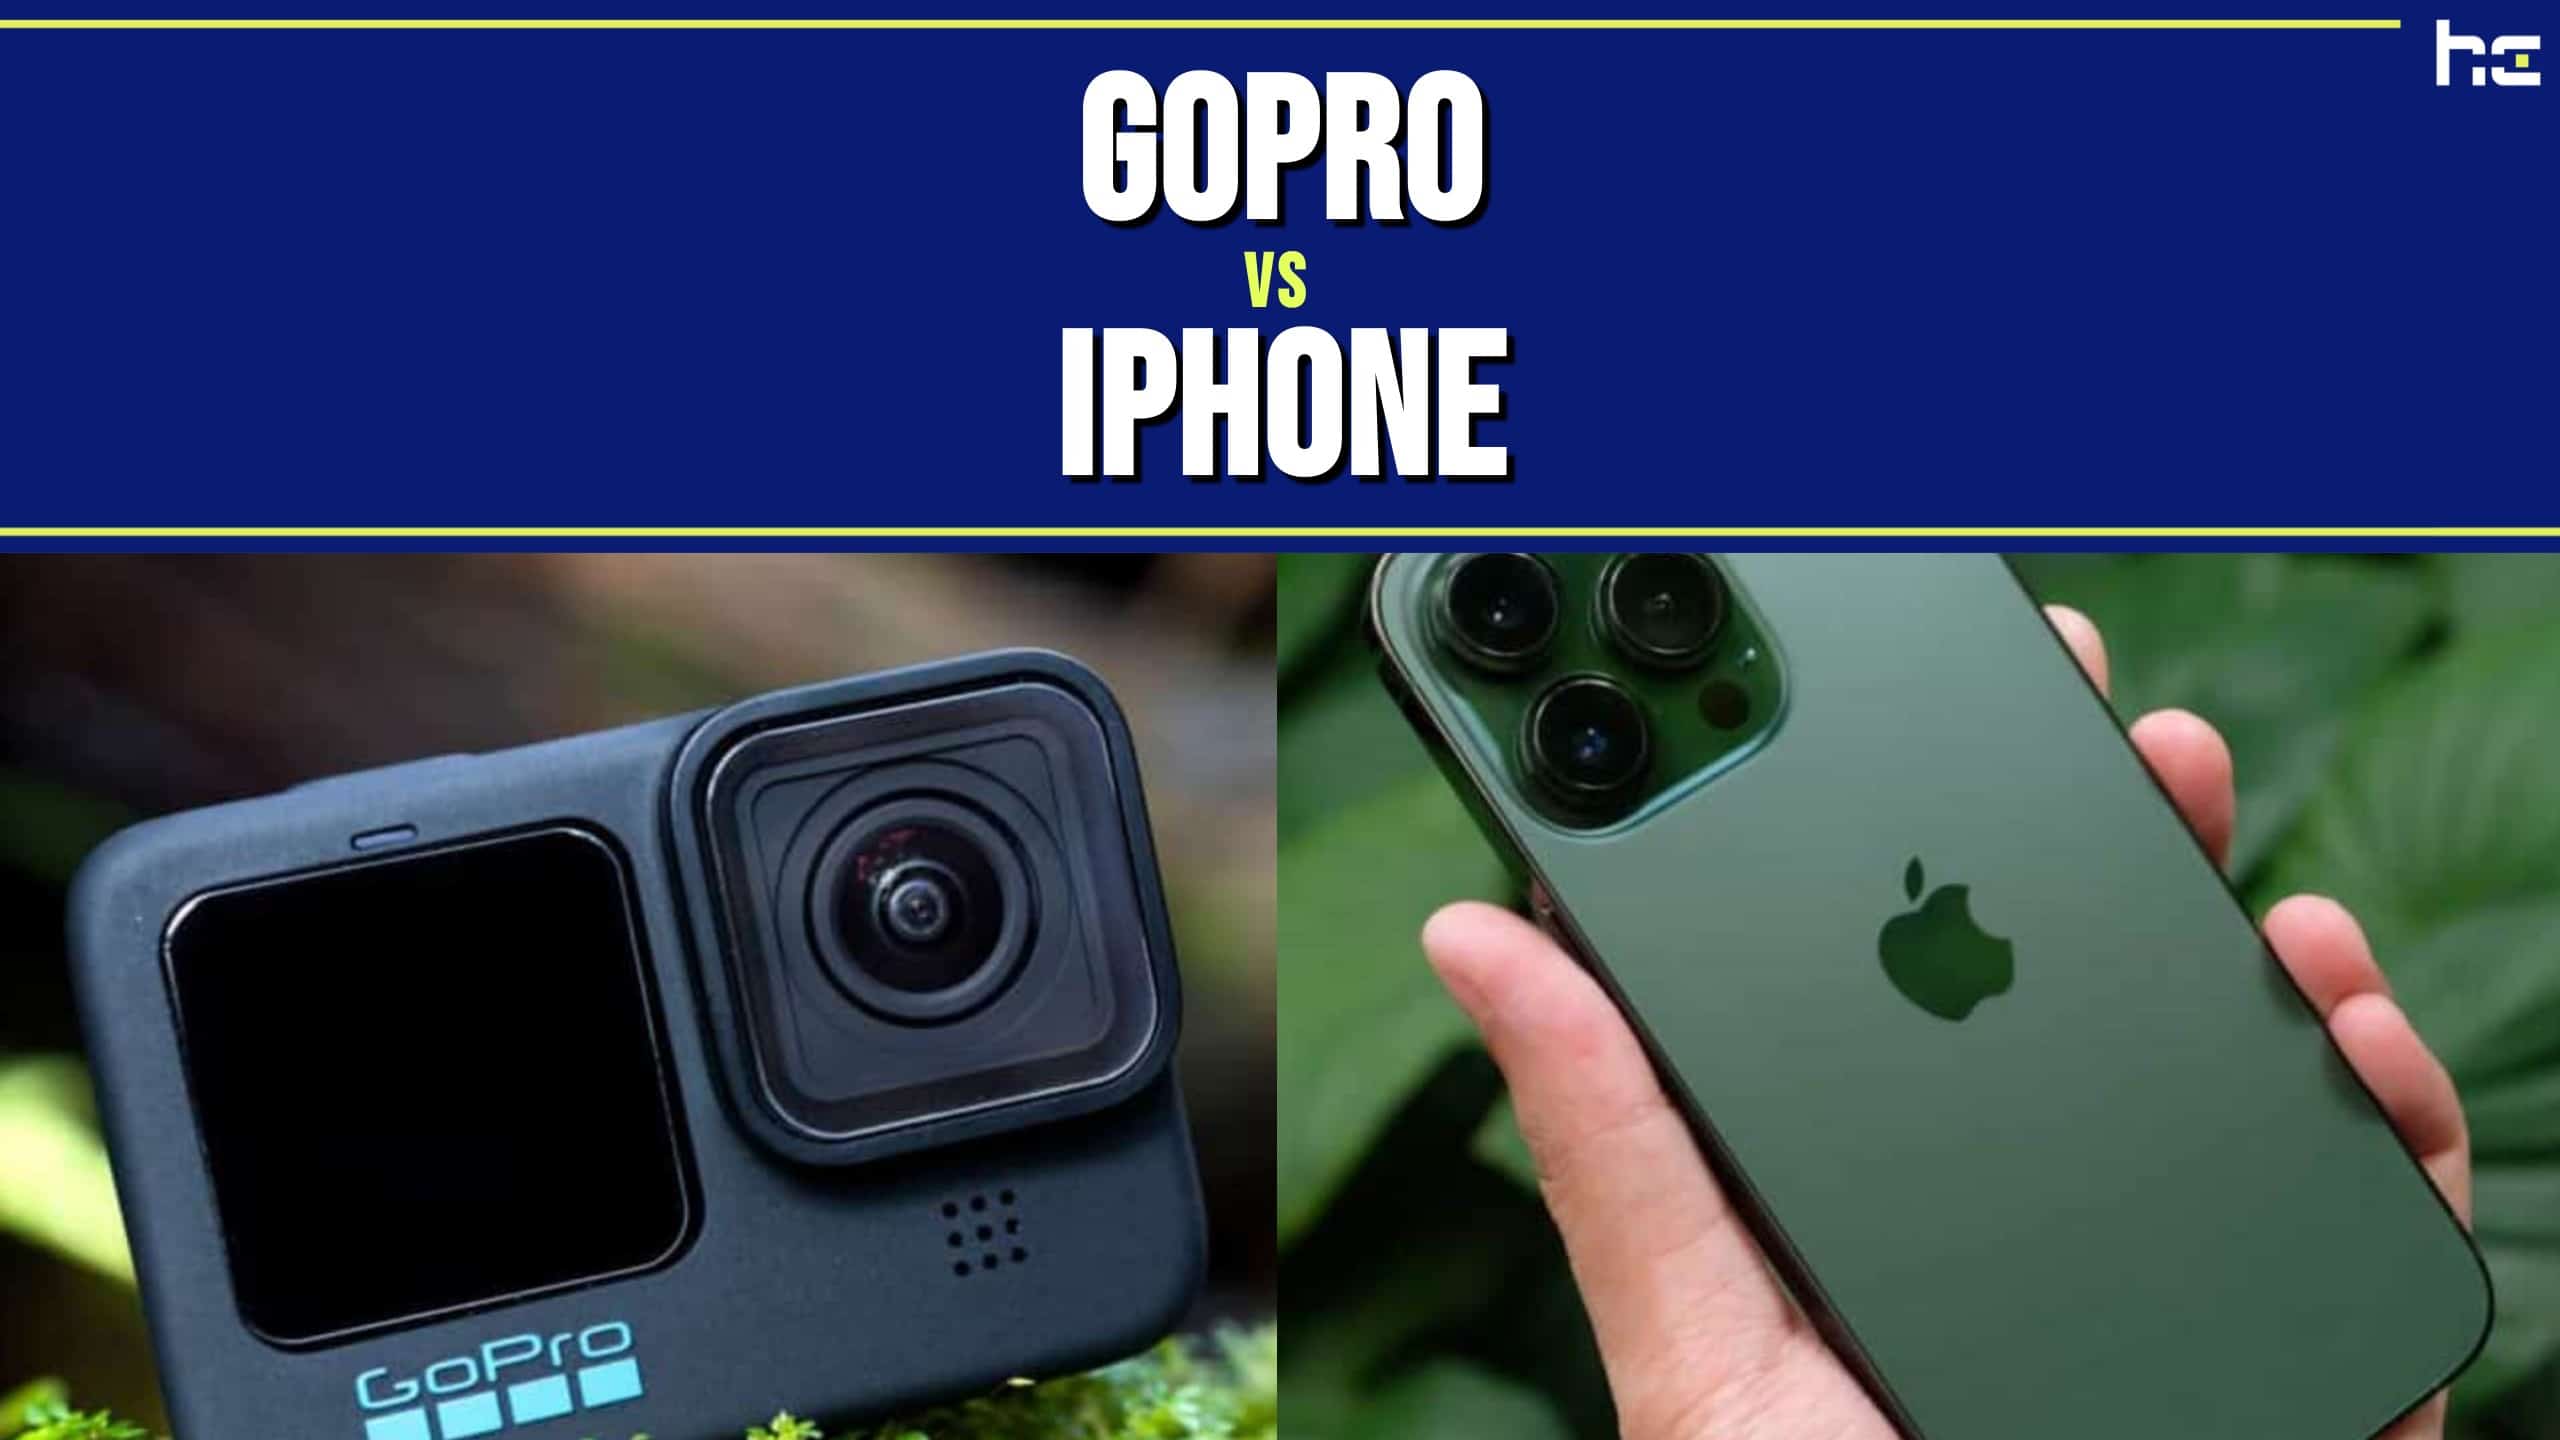 GoPro vs iPhone featured image